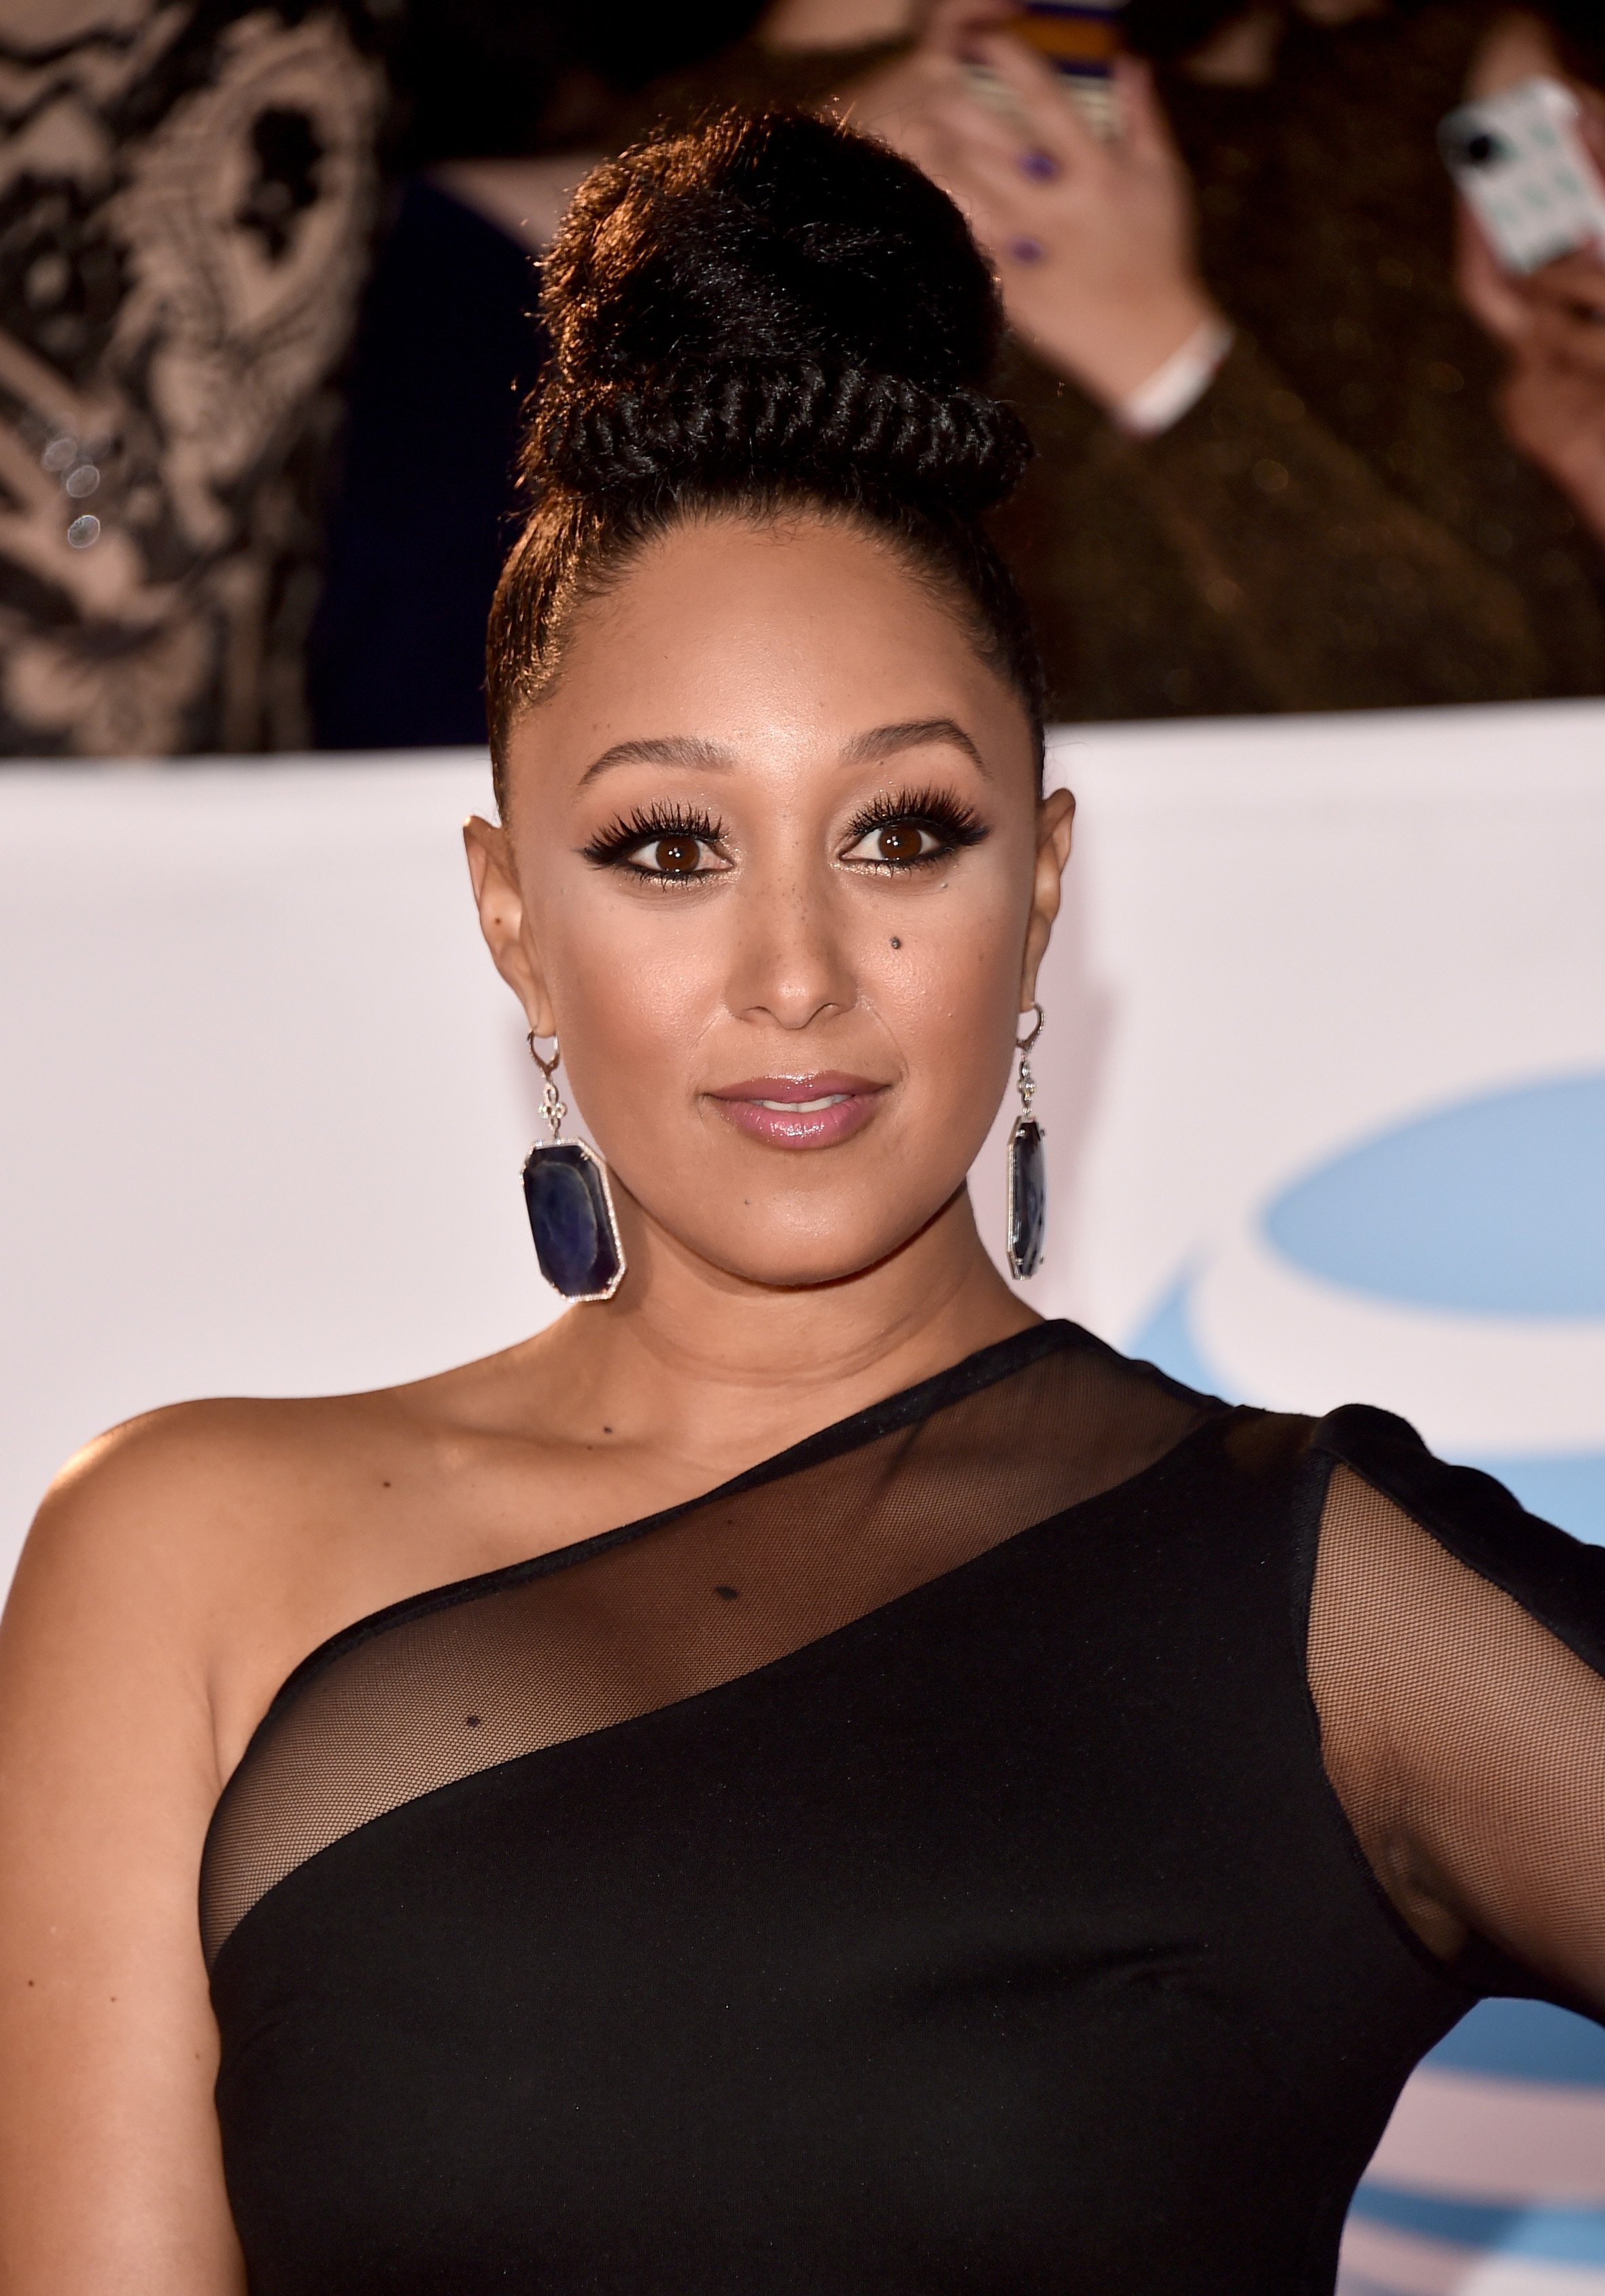 Tamera Mowry at the 49th NAACP Awards in January 2018. | Photo: Getty Images